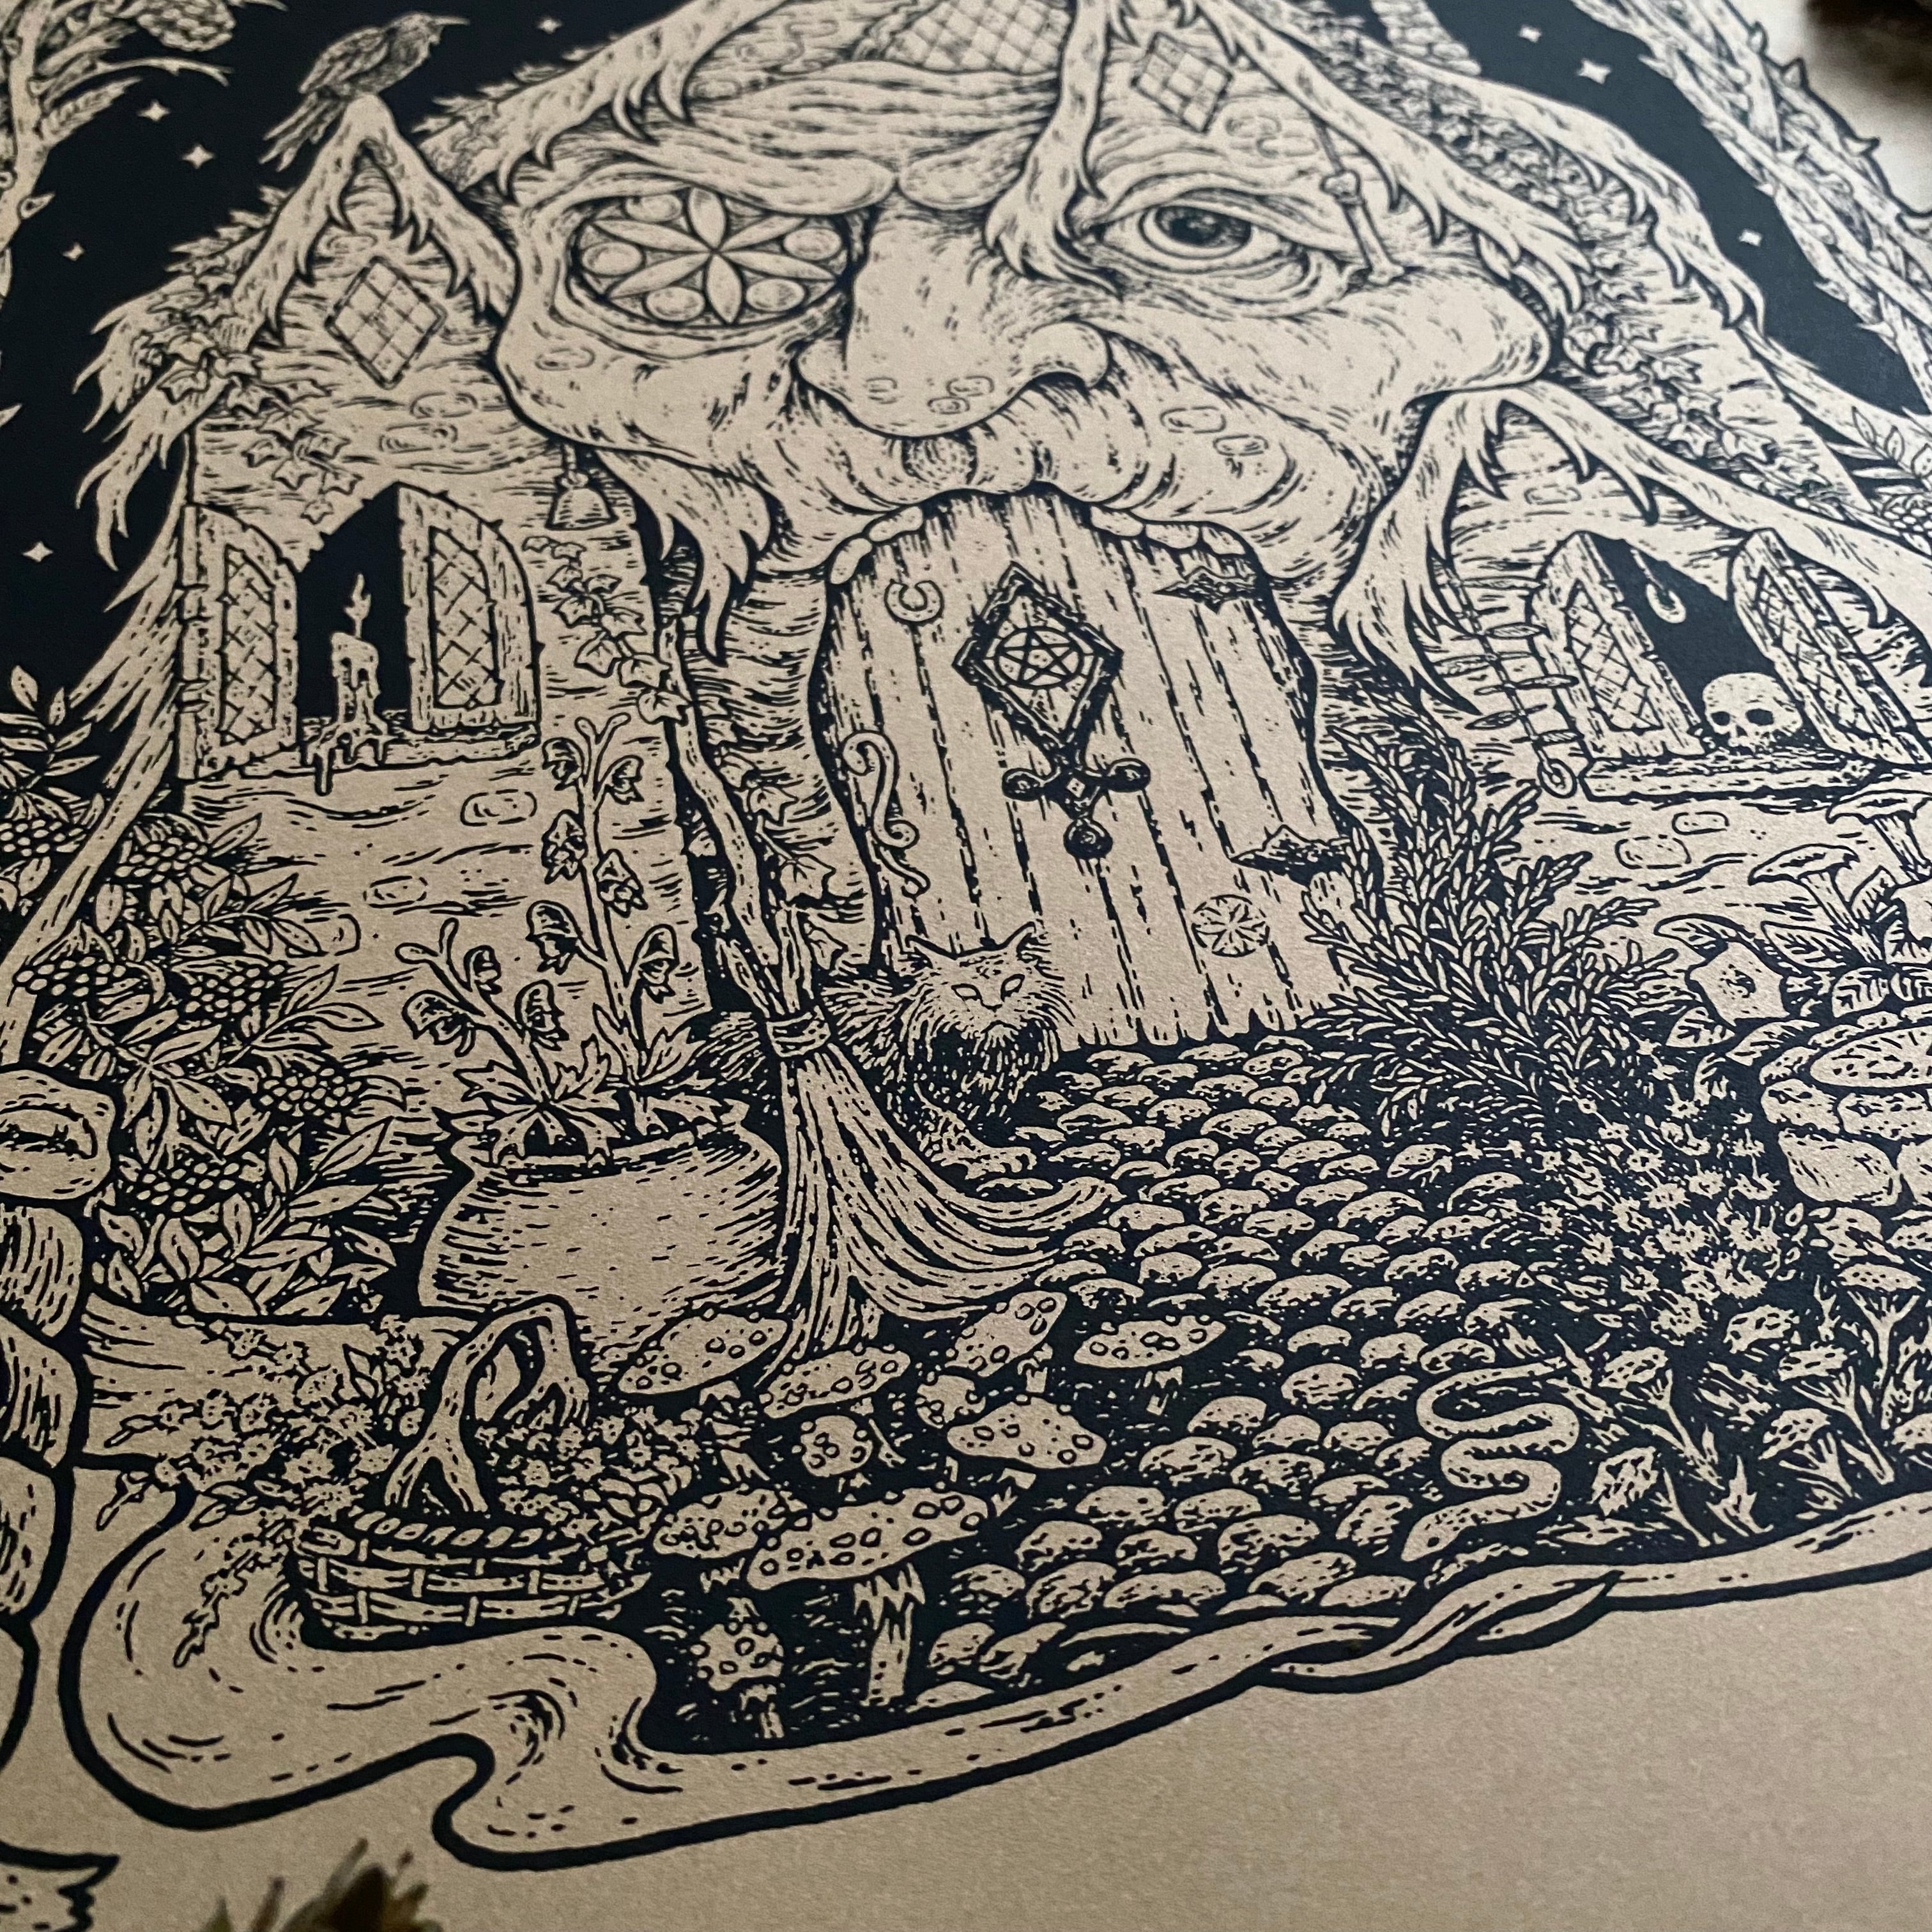 The Crone's Cottage screen print